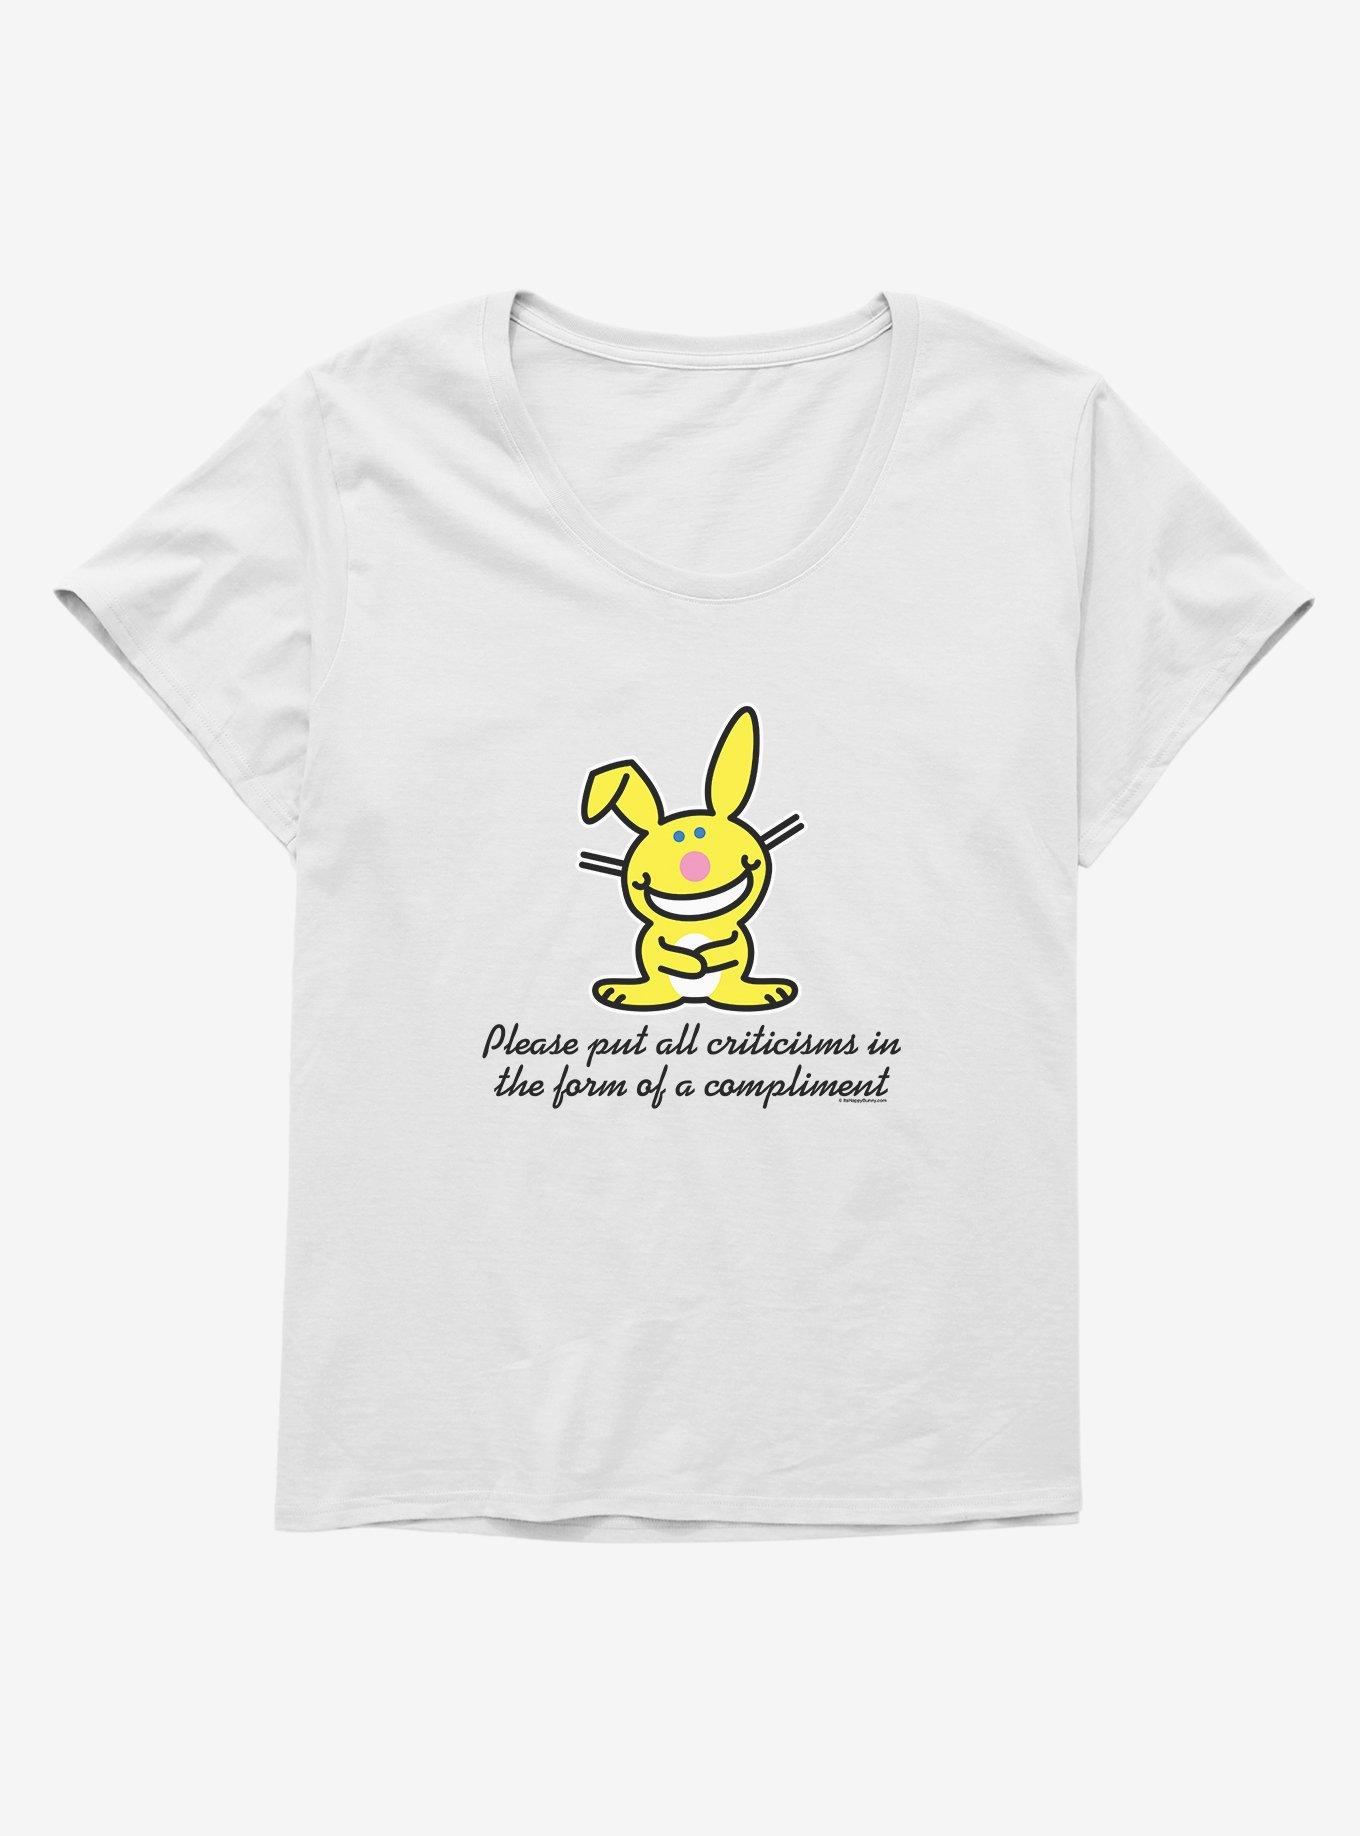 It's Happy Bunny Compliments Only Girls T-Shirt Plus